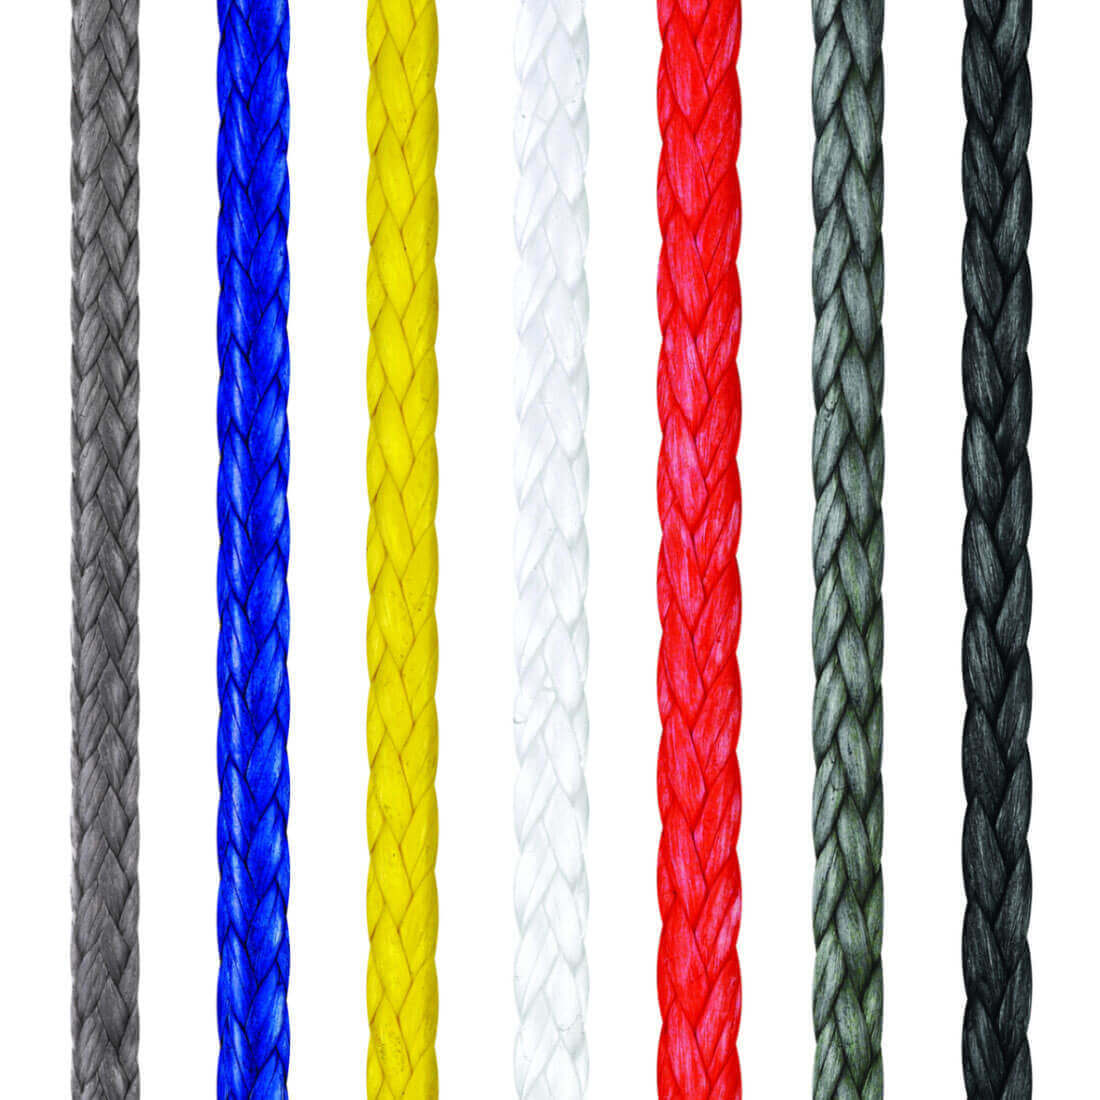 DYNEEMA Rope 1mm Ultra Strong Very Low Stretch  Price is For 20 metres 